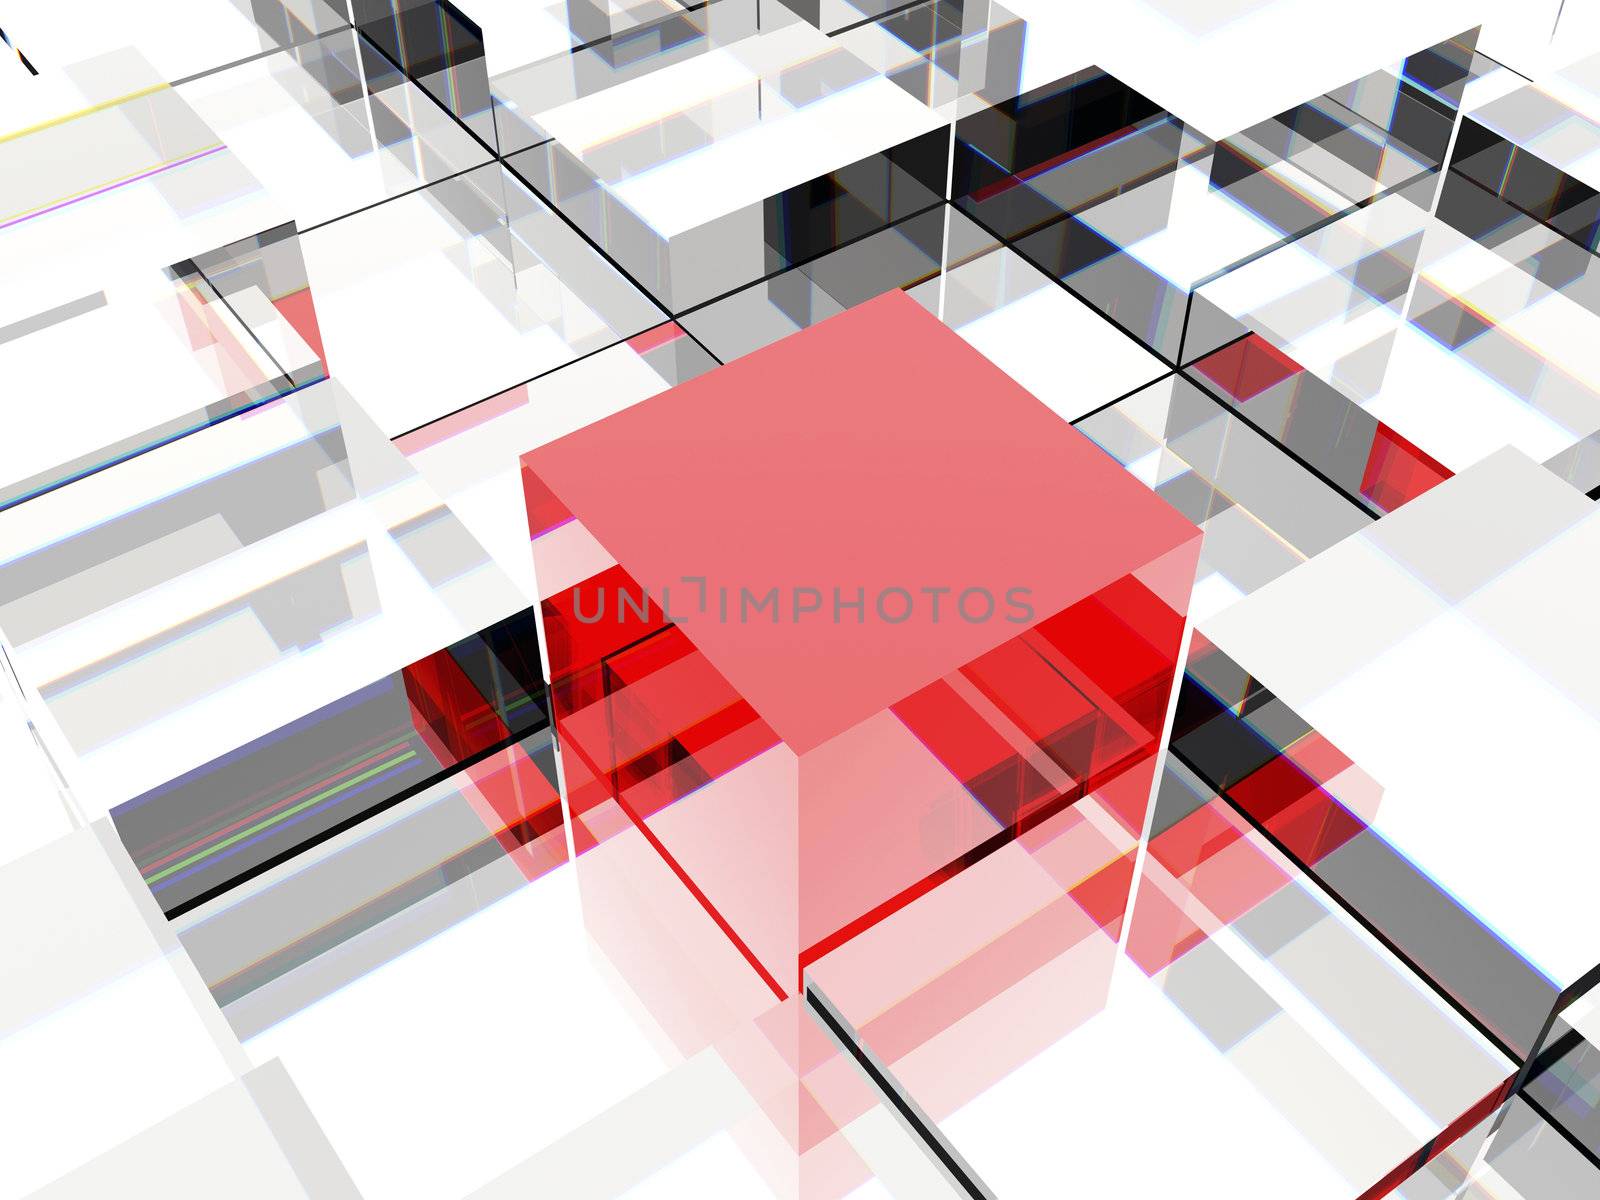 3d image of one red cube against other cubes, symbolizing leadership or different thinking